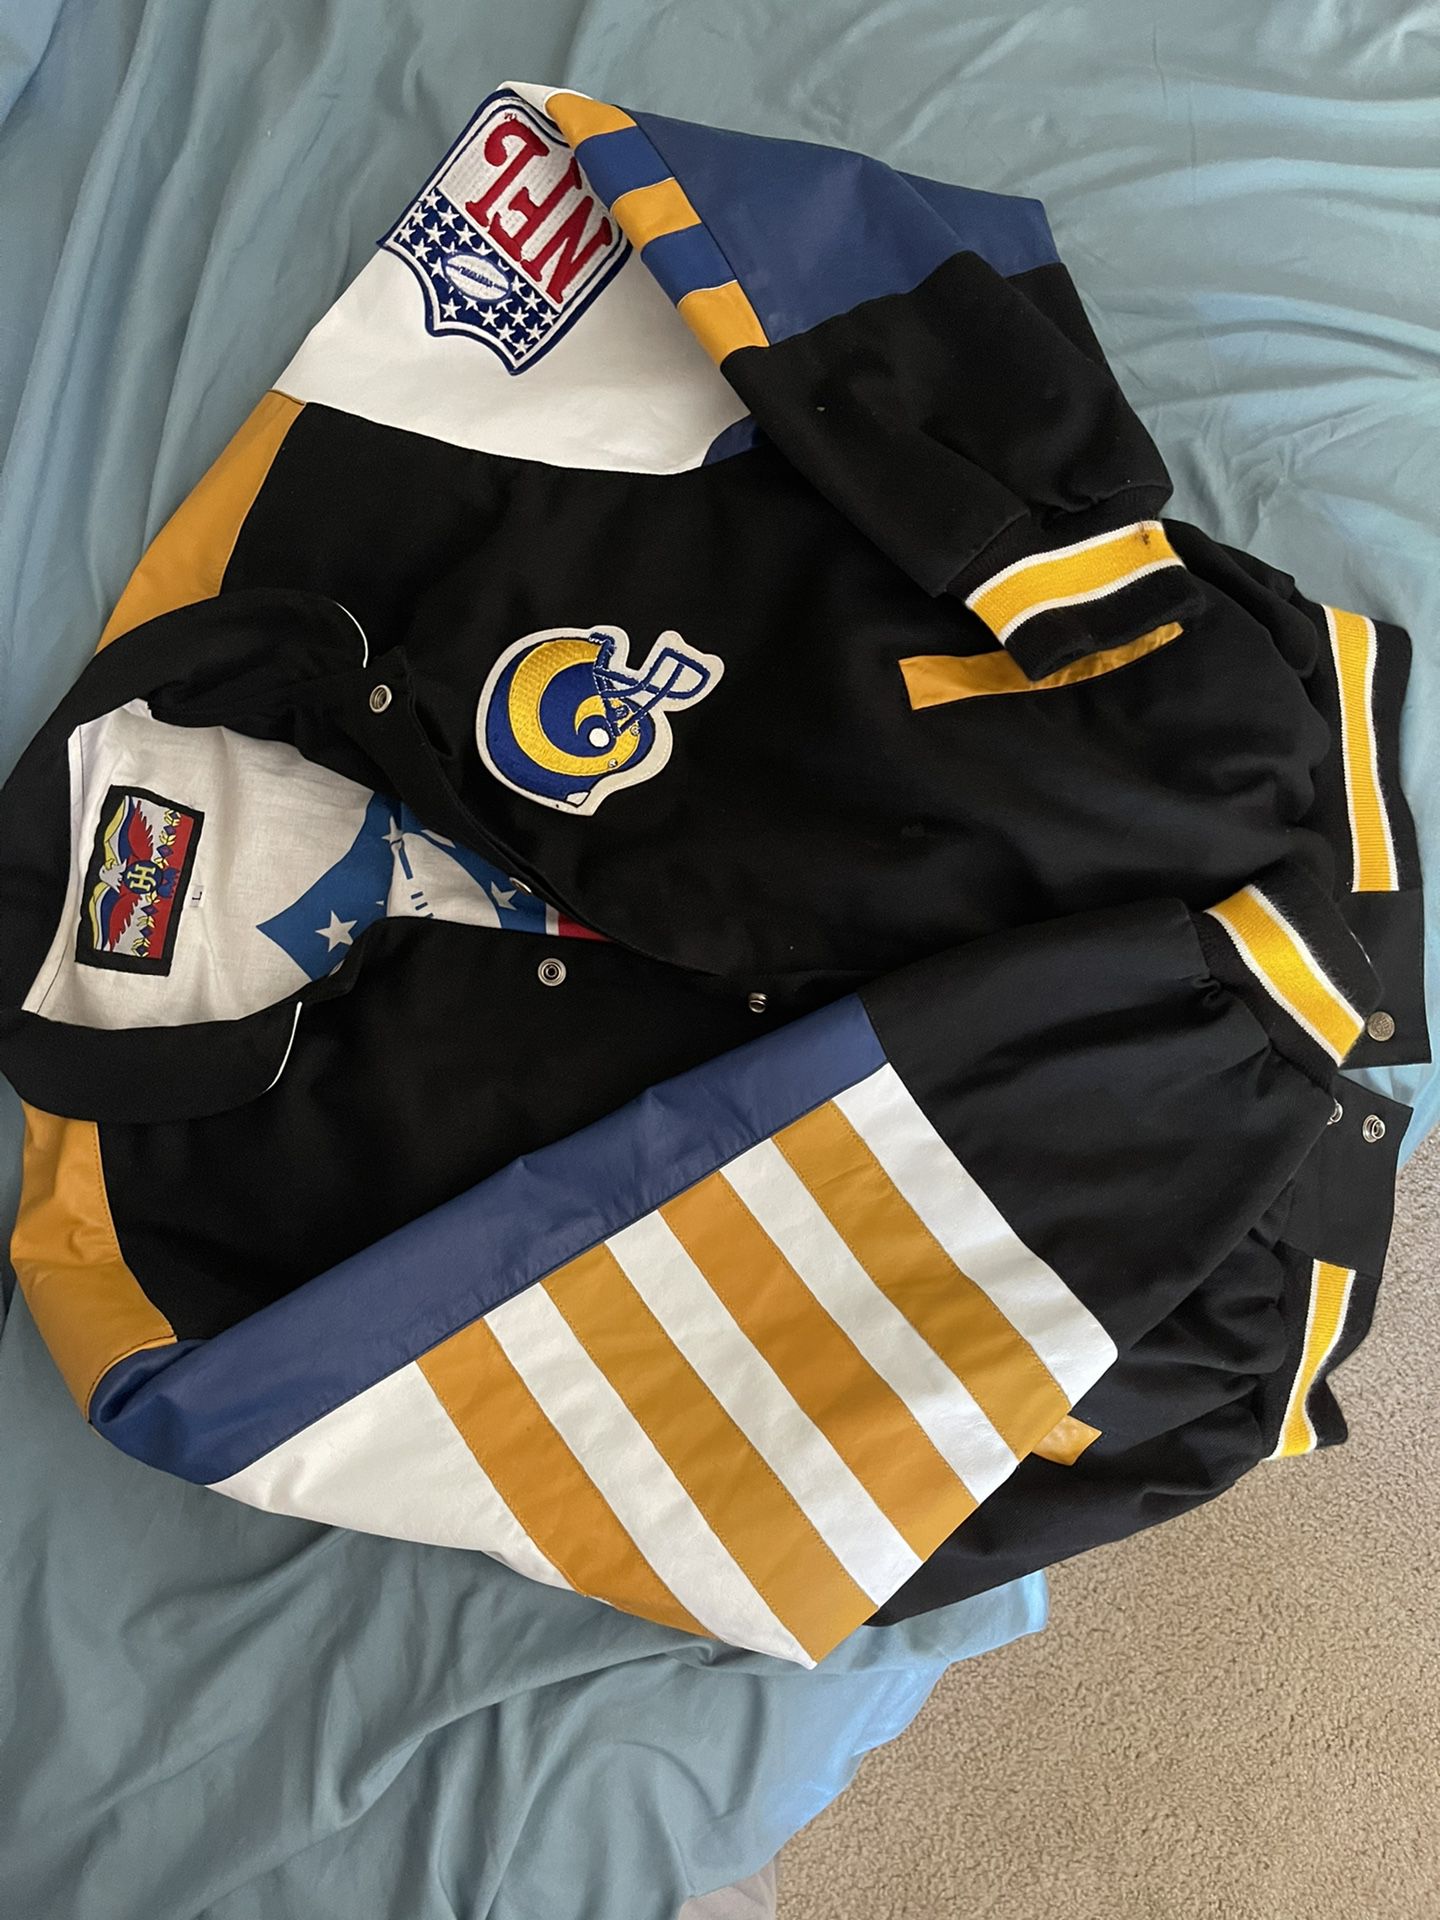 1990 Rams LA Jacket Authentic Rams Fans Should Know This Is Their Uniform Colors Before They Left And Now We Got Em Back Ask For Questions 